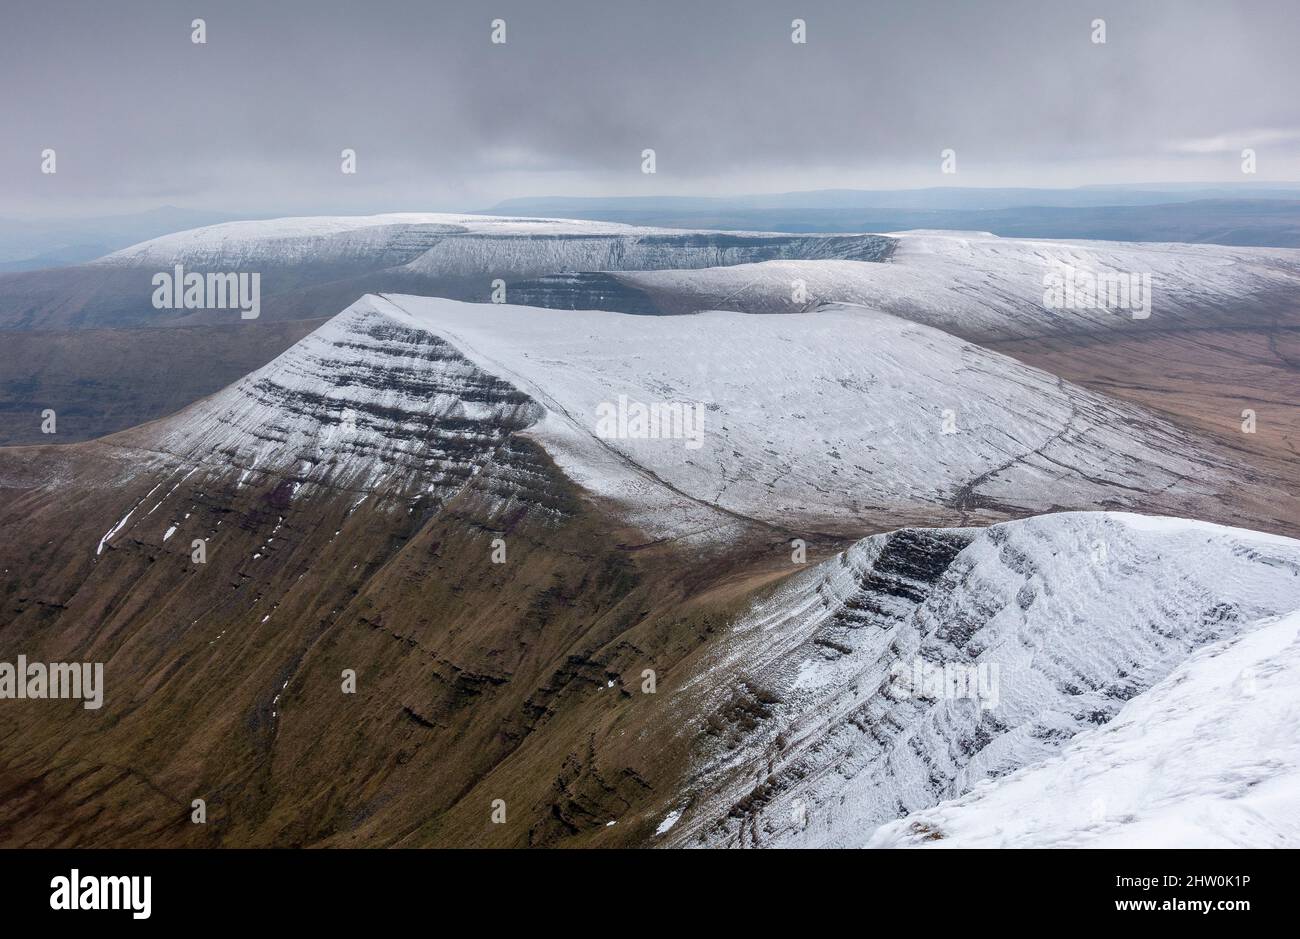 Snow covered Pen Y Fan in the Brecon Beacons National Park, Wales, UK Stock Photo